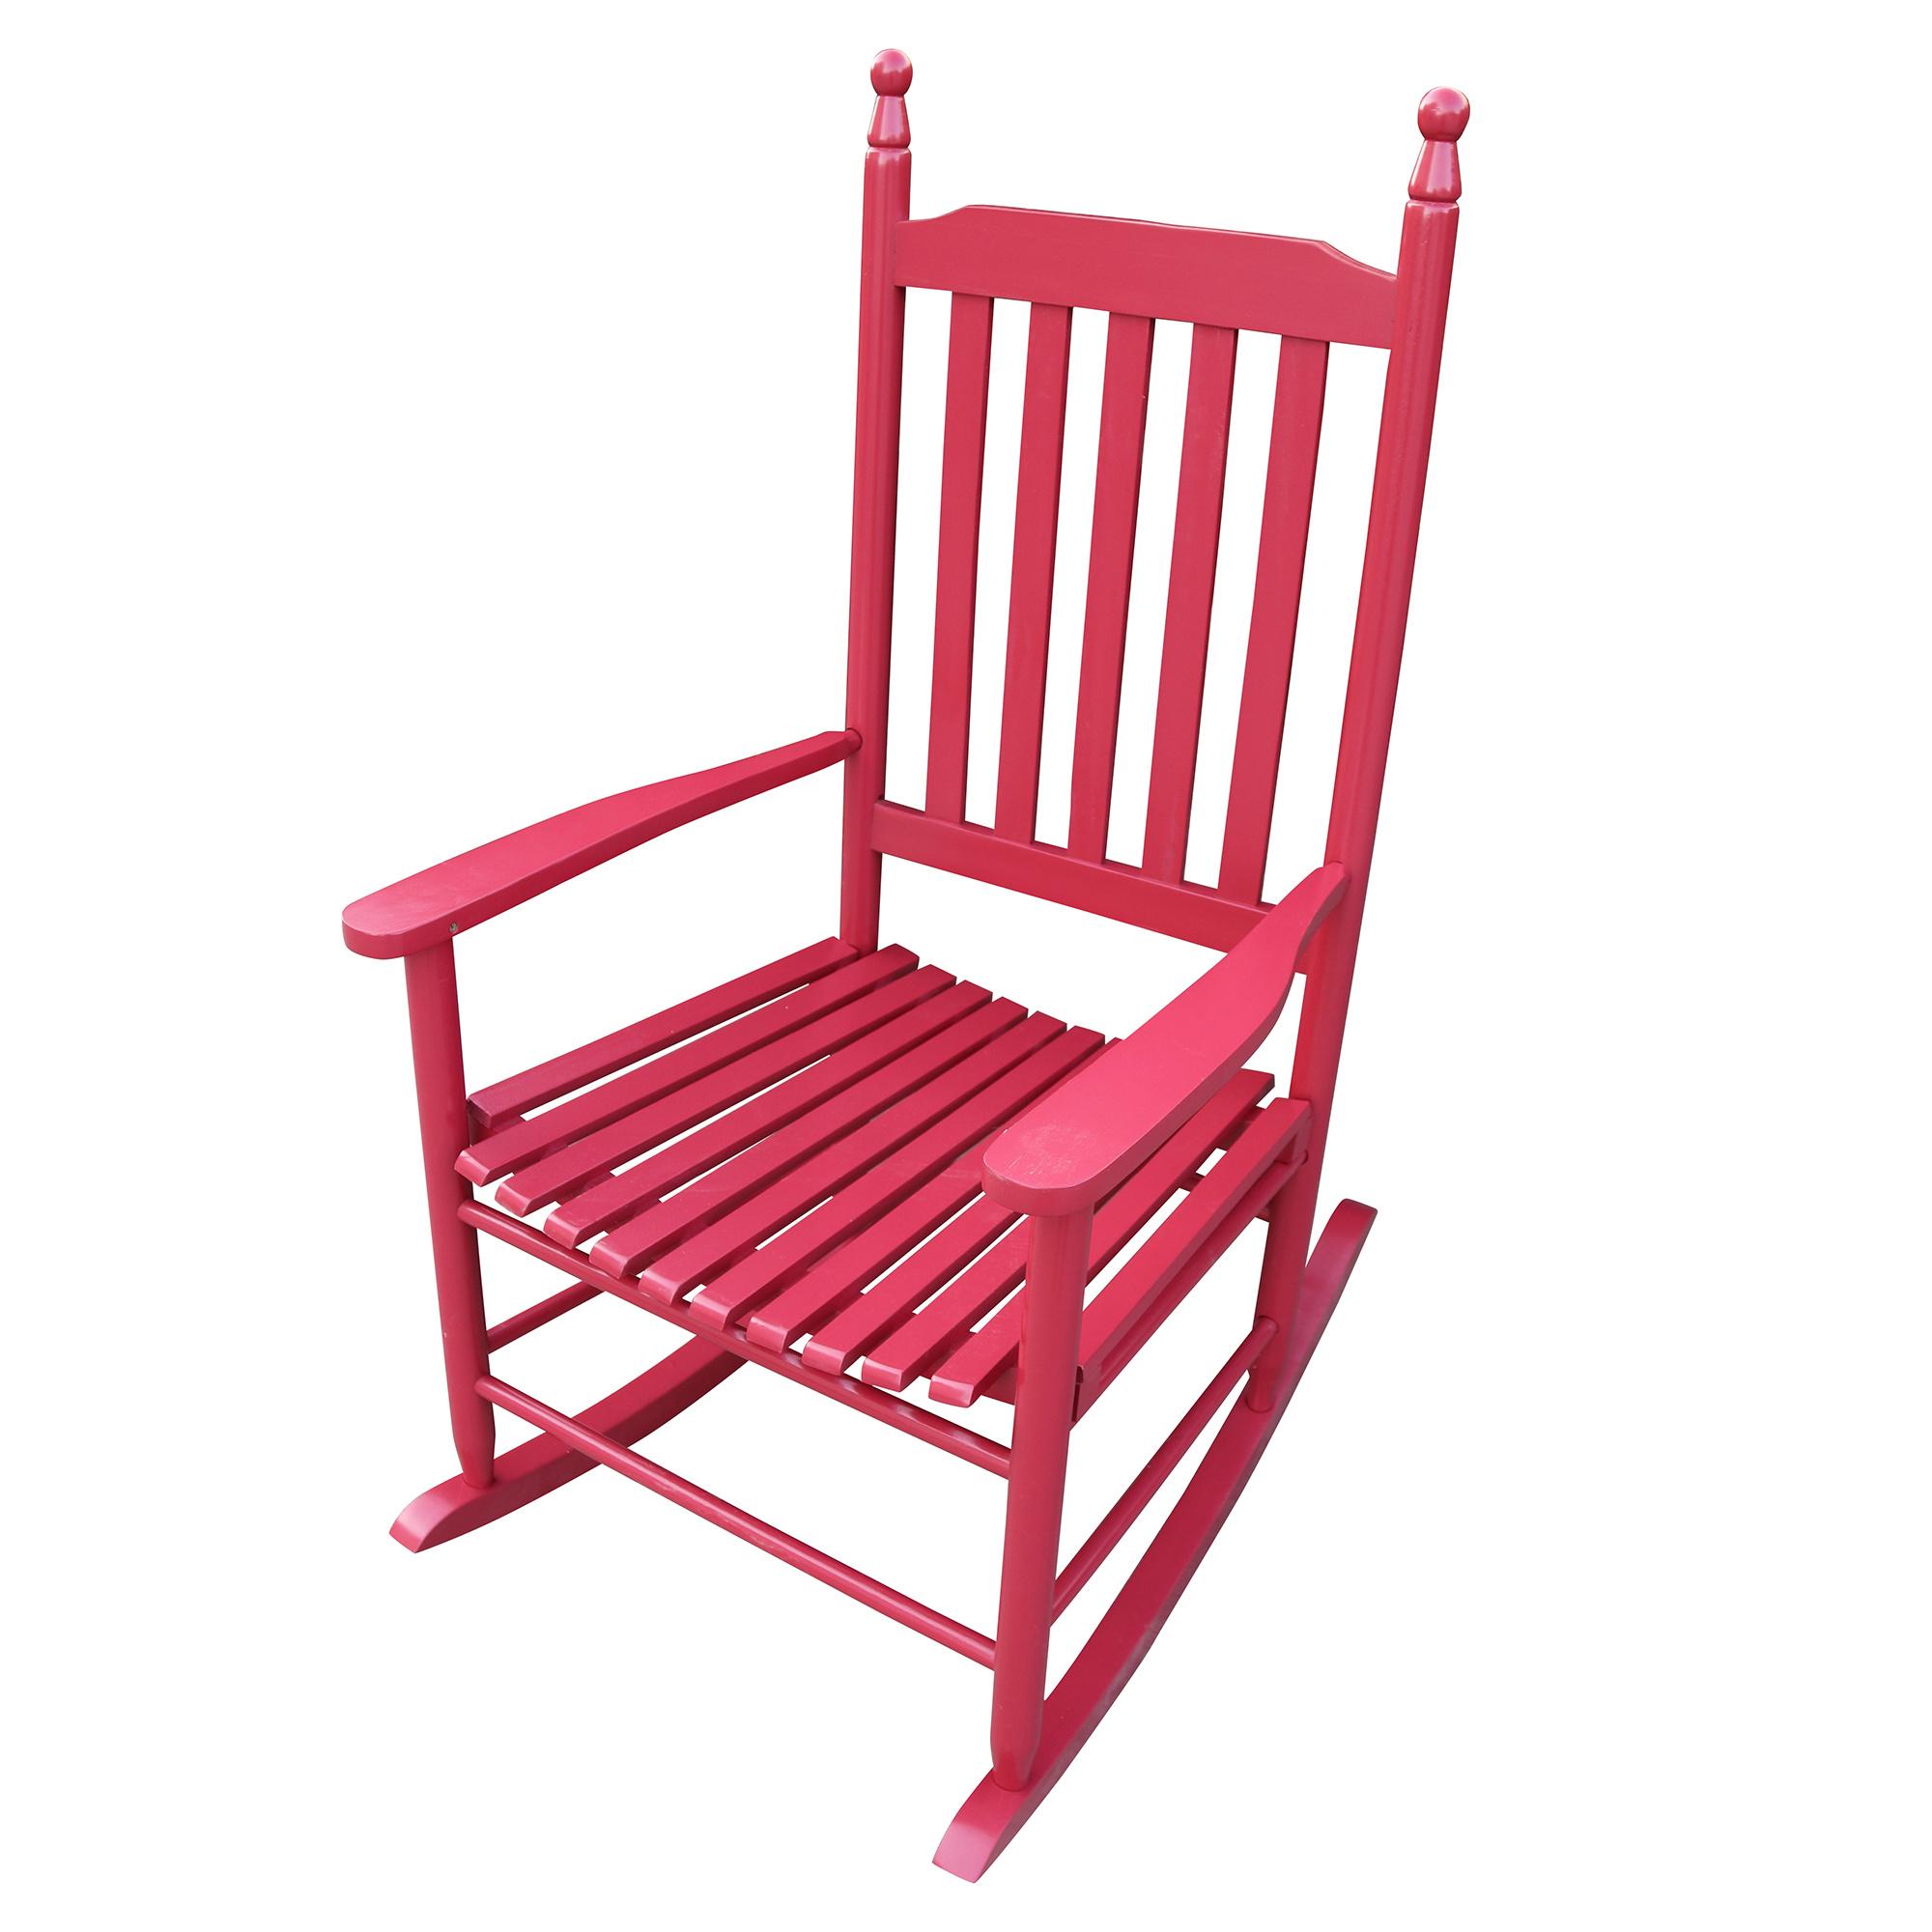 Patio Outdoor Rocking Chair, Wooden Porch Rocker Chair, Modern Leisure Ergonomic Chair with Sturdy Slatted Back Rest for Indoor Garden Lawn Deck Balcony Backyard, Supports up to 280 LBS, Red - image 4 of 7